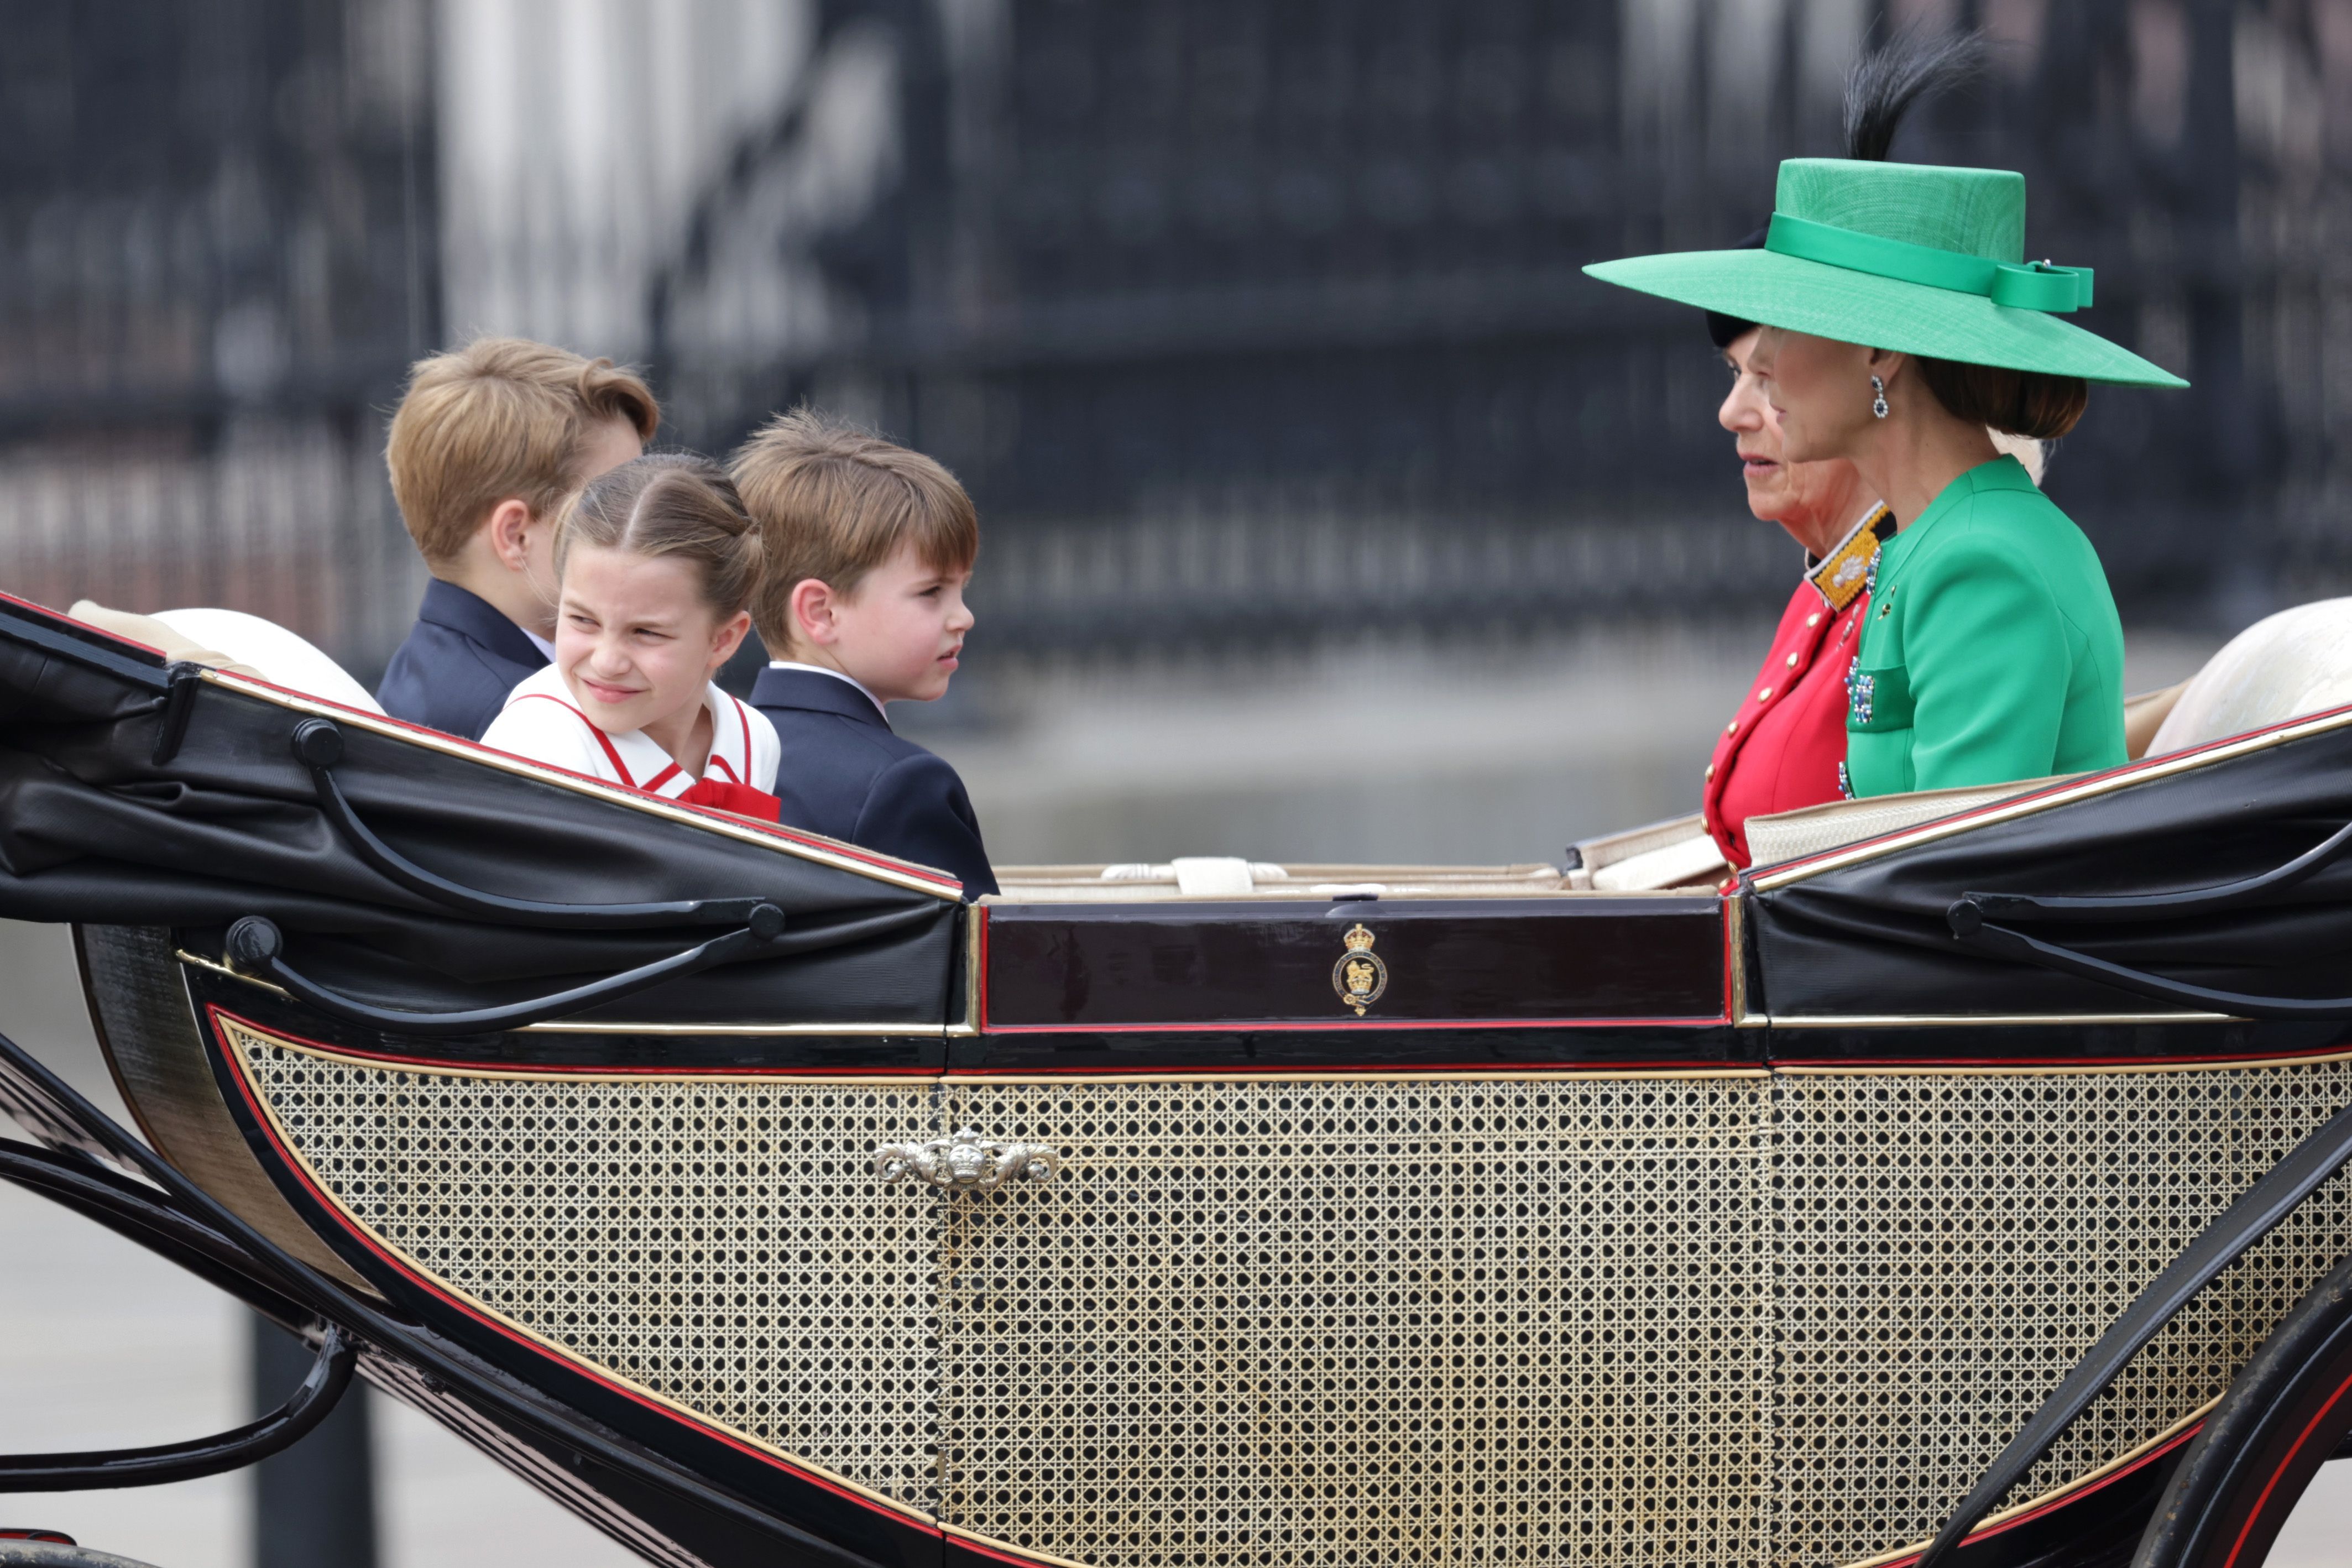 Princess Charlotte looks back as she drives a horse-drawn carriage with her brothers, mother (Kate Middleton) and stepmother (Camilla Parker Bowles)